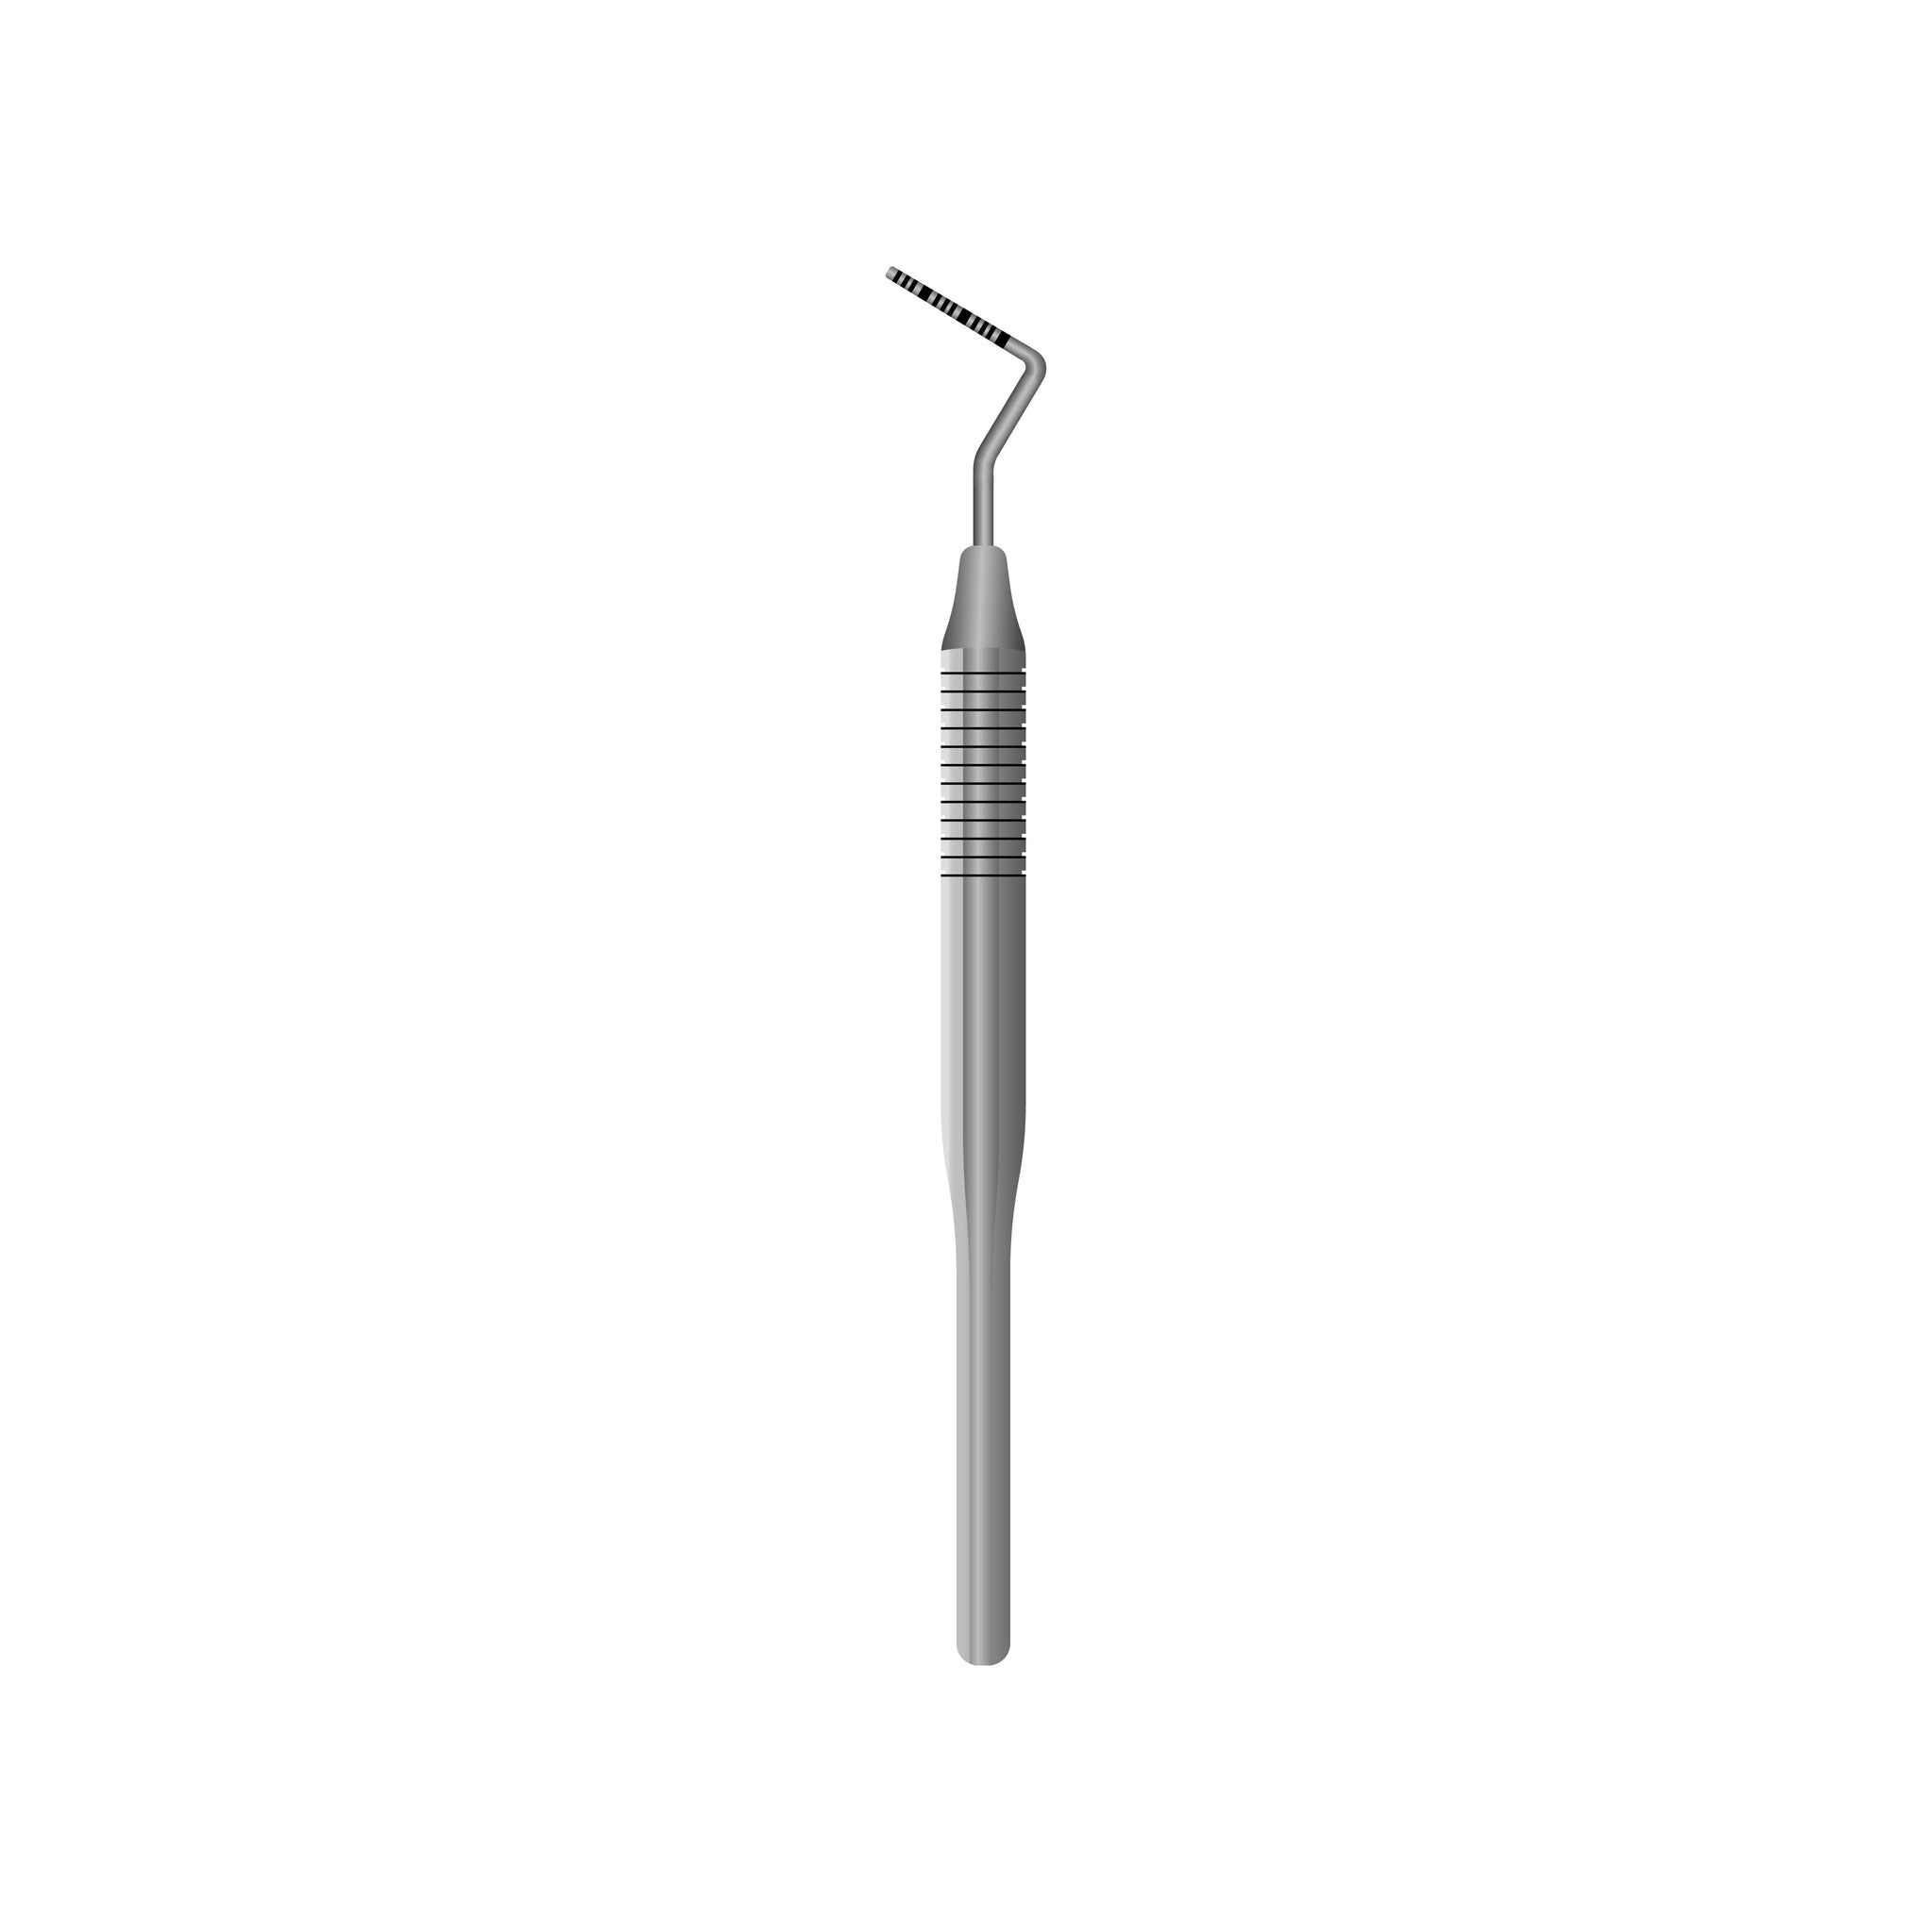 A silver metal probe with a tapered tip.